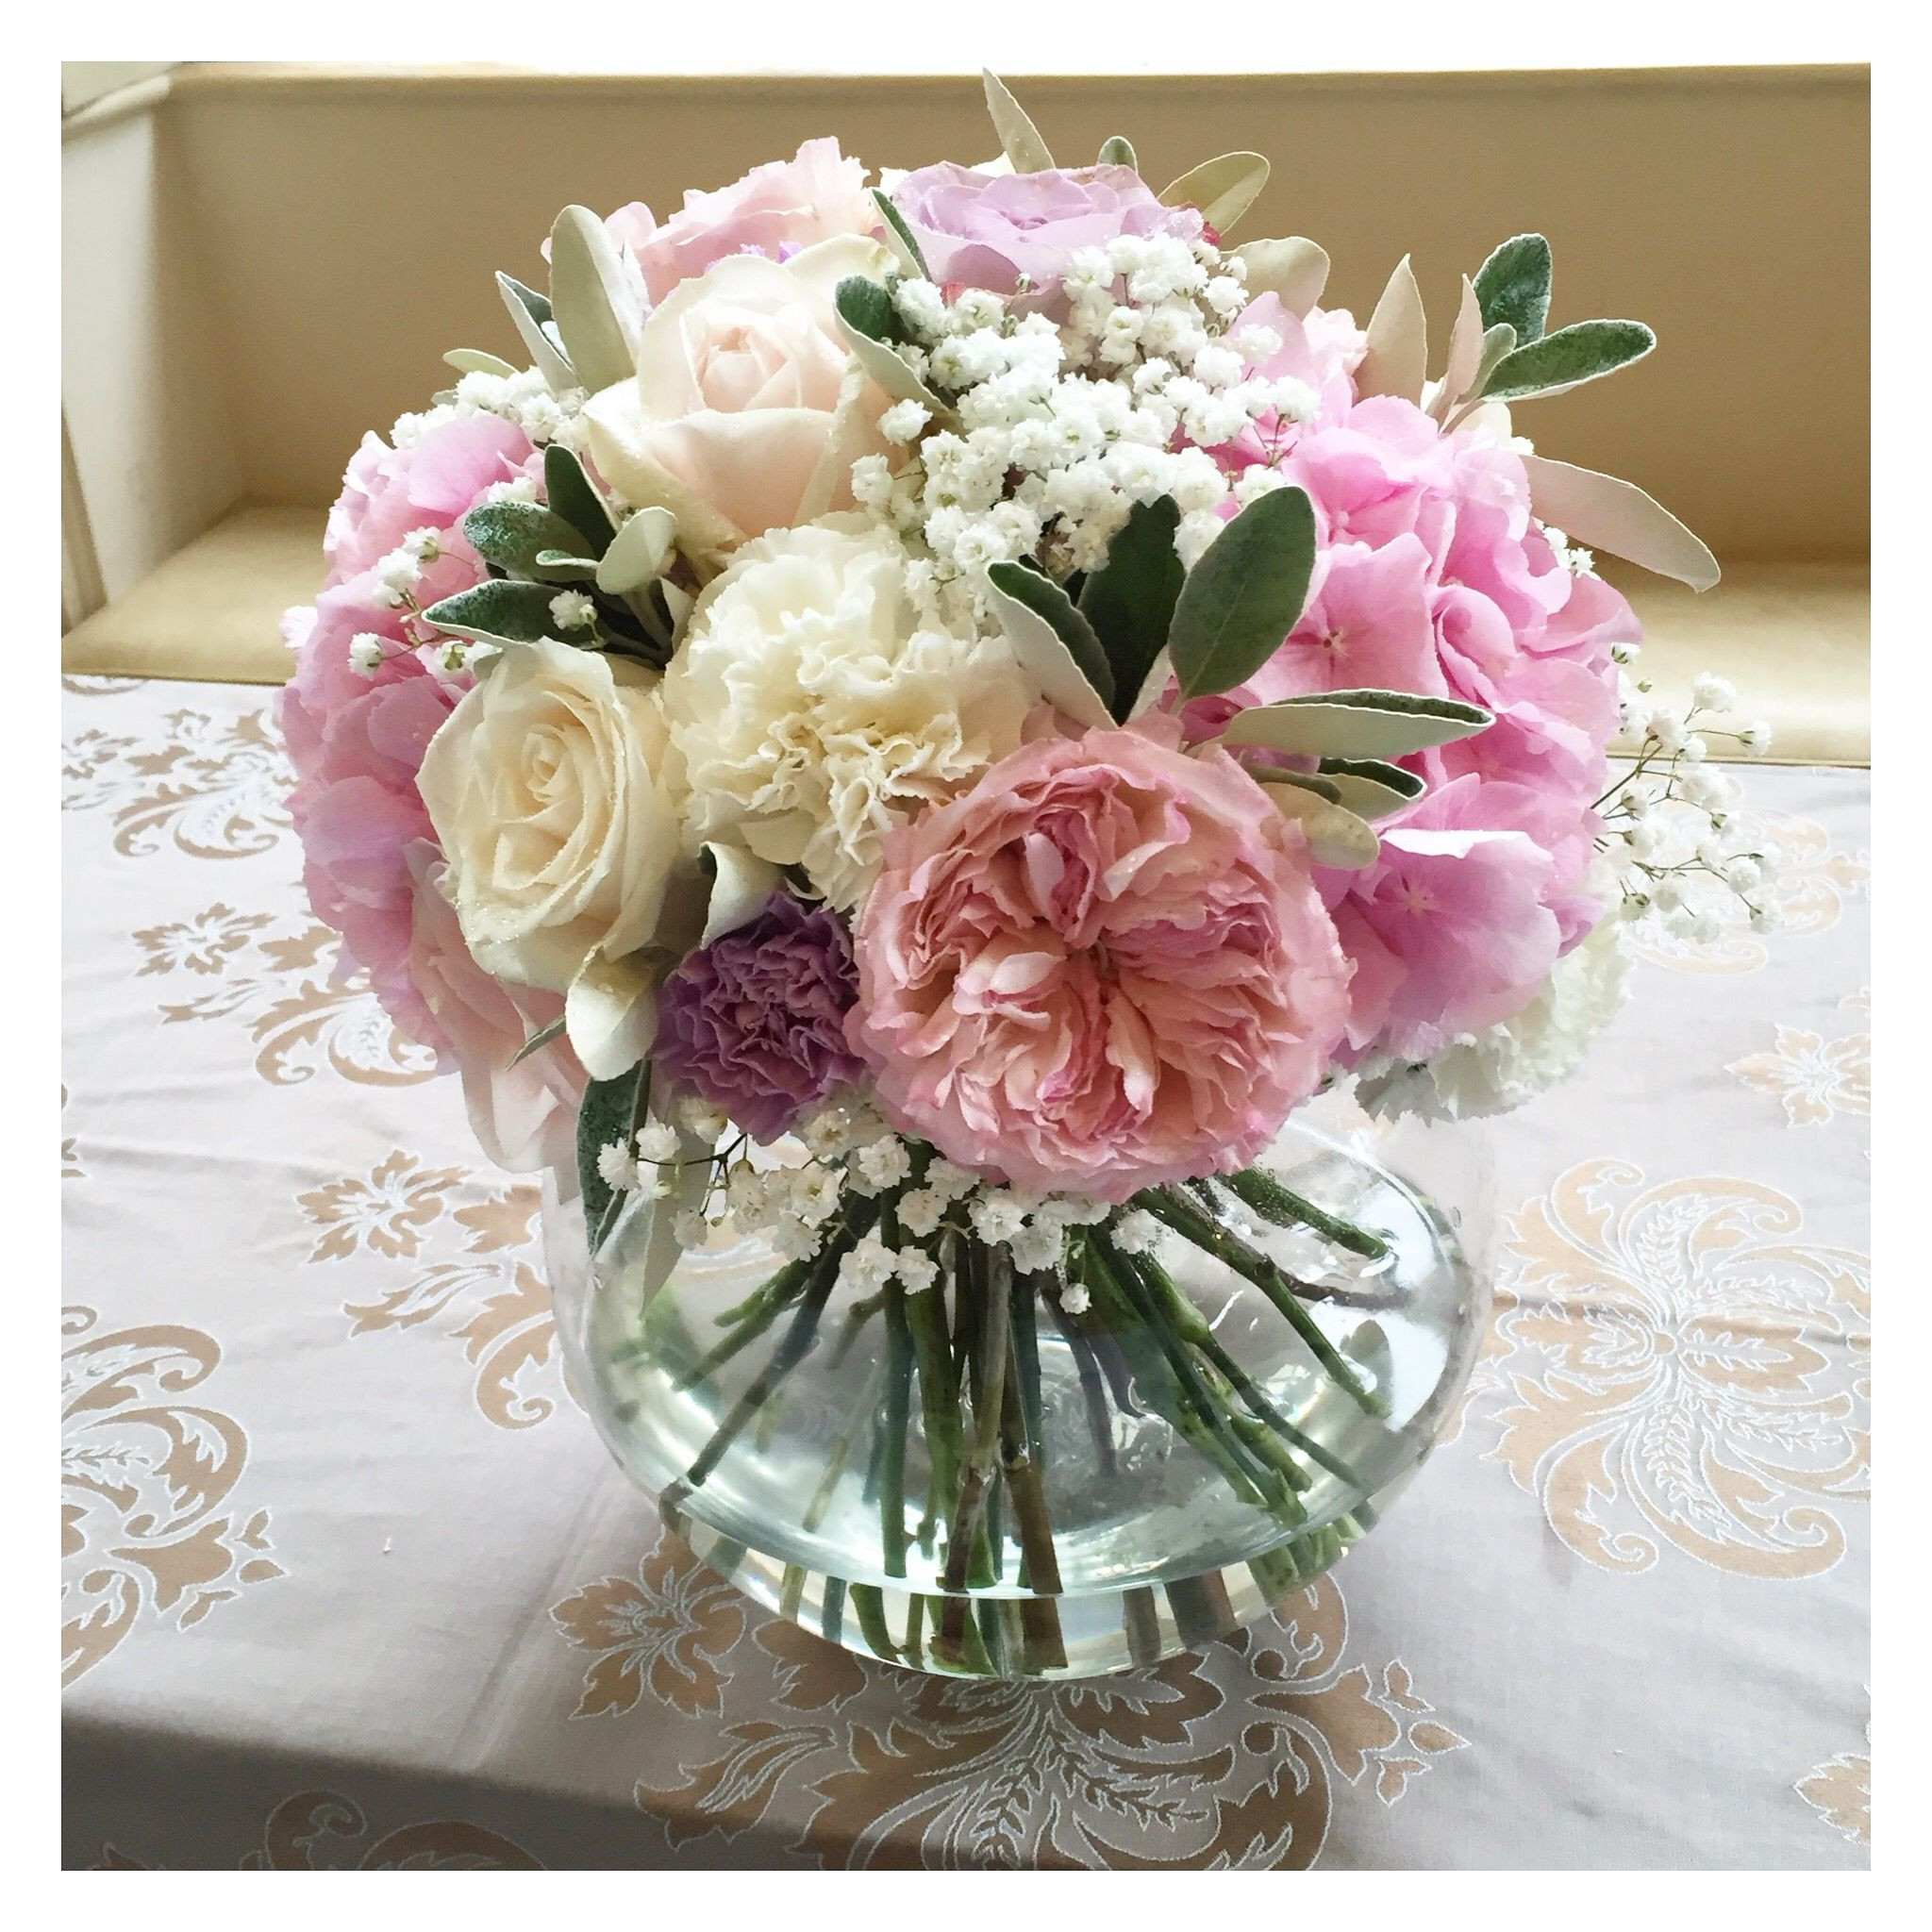 23 Spectacular Best Vase for Peonies 2024 free download best vase for peonies of fish bowl flower arrangements image pink rose hydrangea and peony within fish bowl flower arrangements image pink rose hydrangea and peony fish bowl wedding centrepi